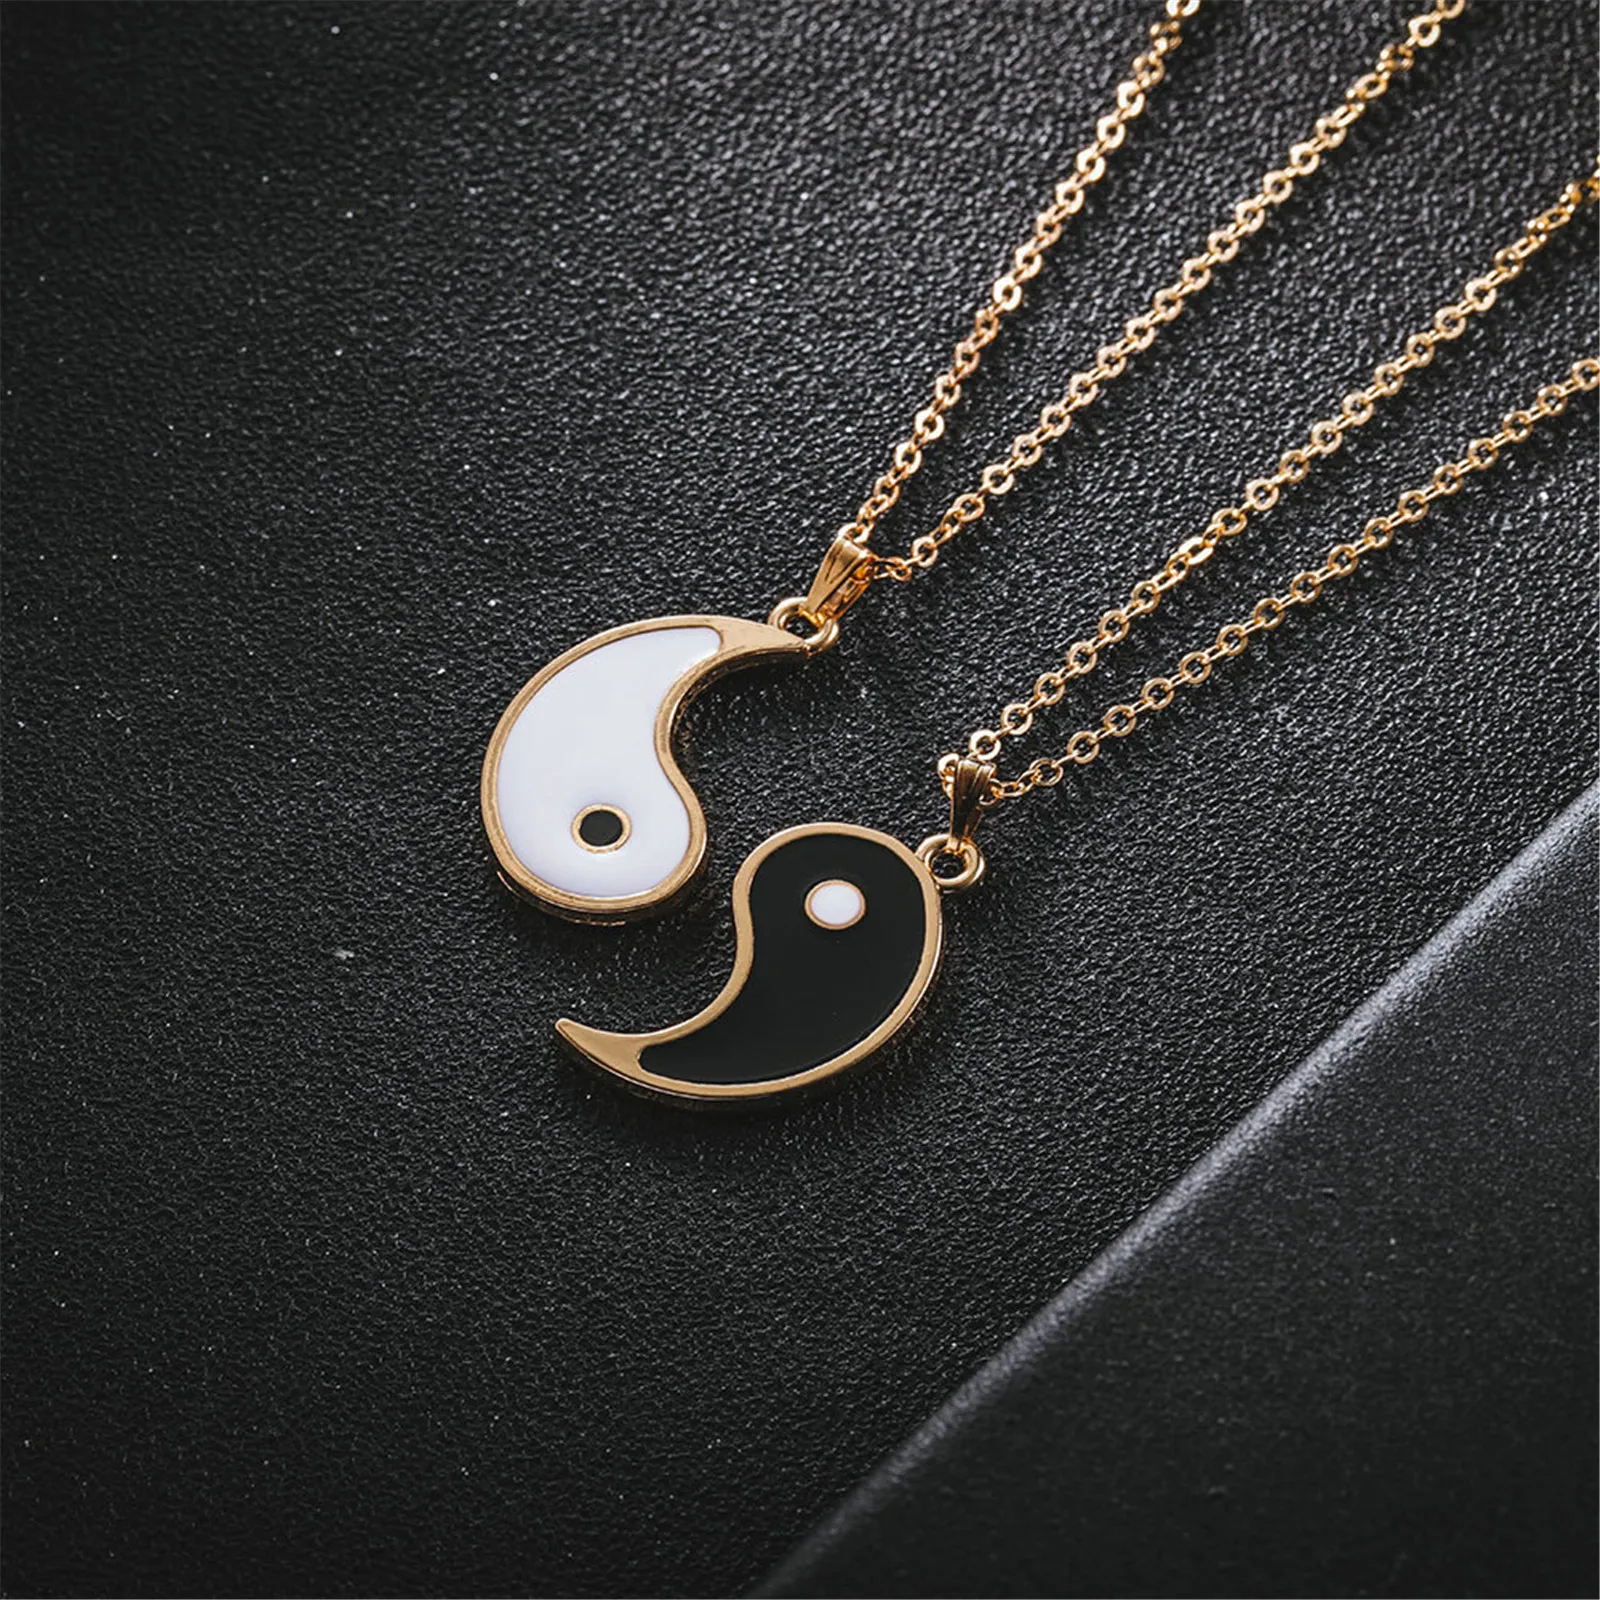 

Yin Yang Friendship Necklace for Girls Friends Titanium Stainless Steel Round Metal Chain Pendant Couple Piece Puzzle Necklace